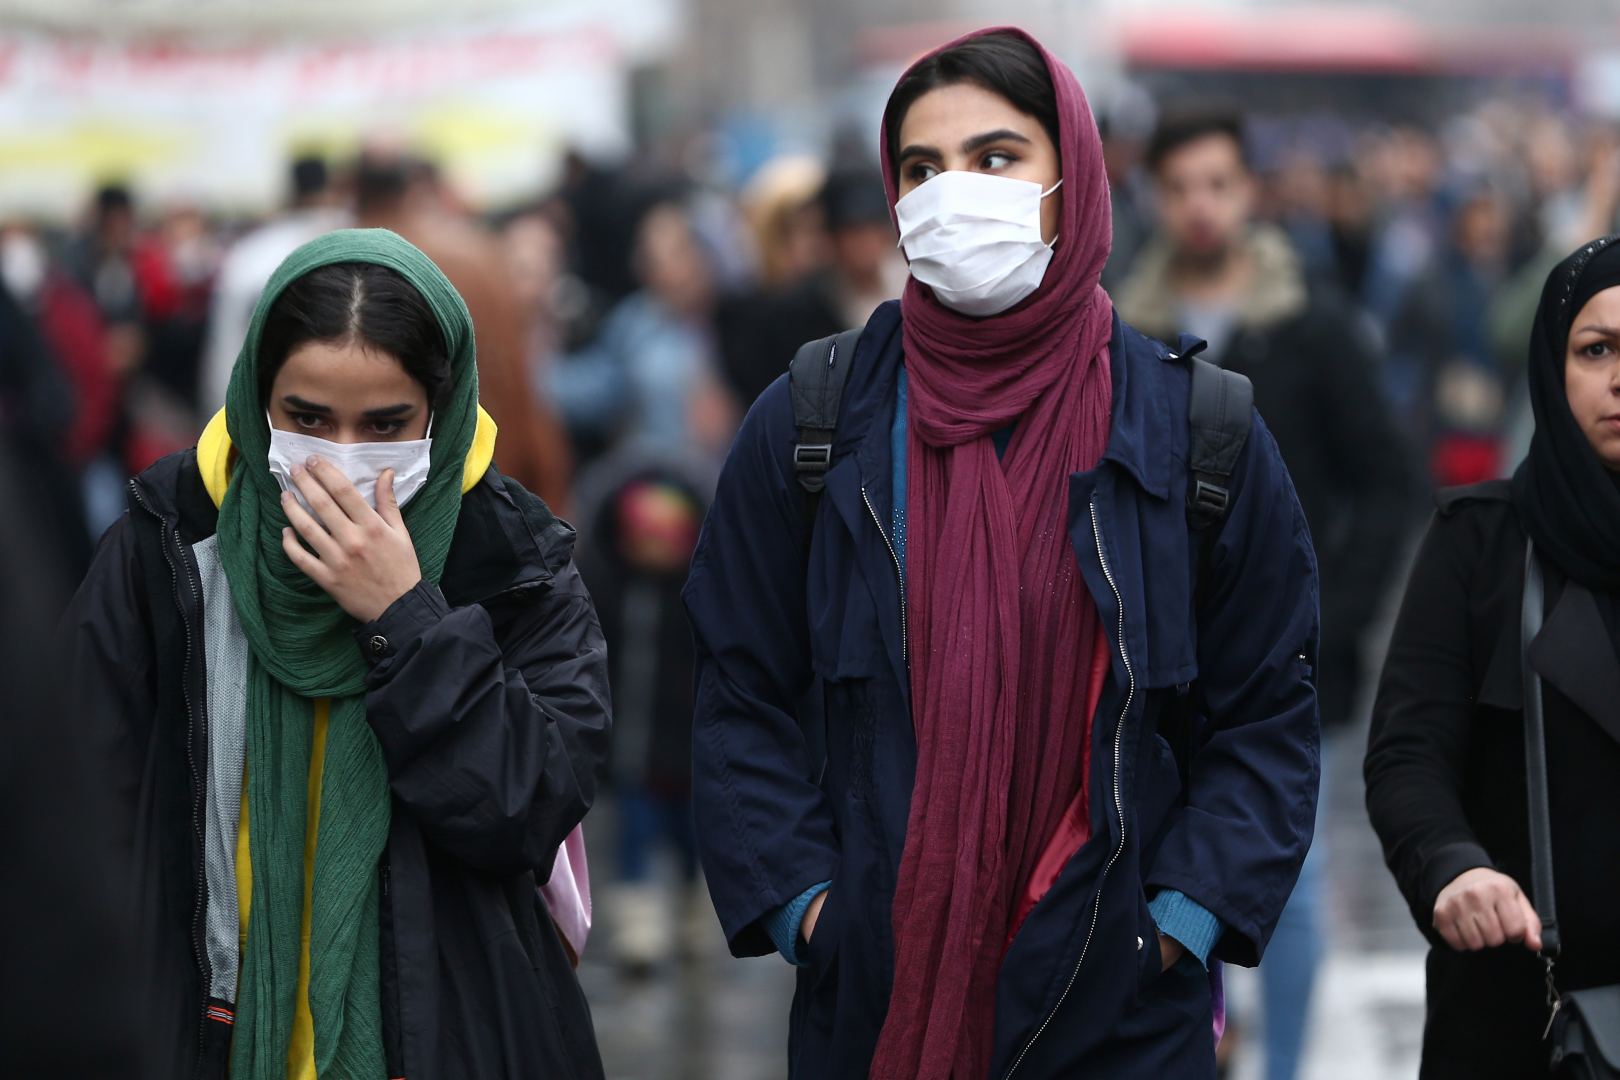 More than 1 million people recover from COVID-19 pandemic in Iran